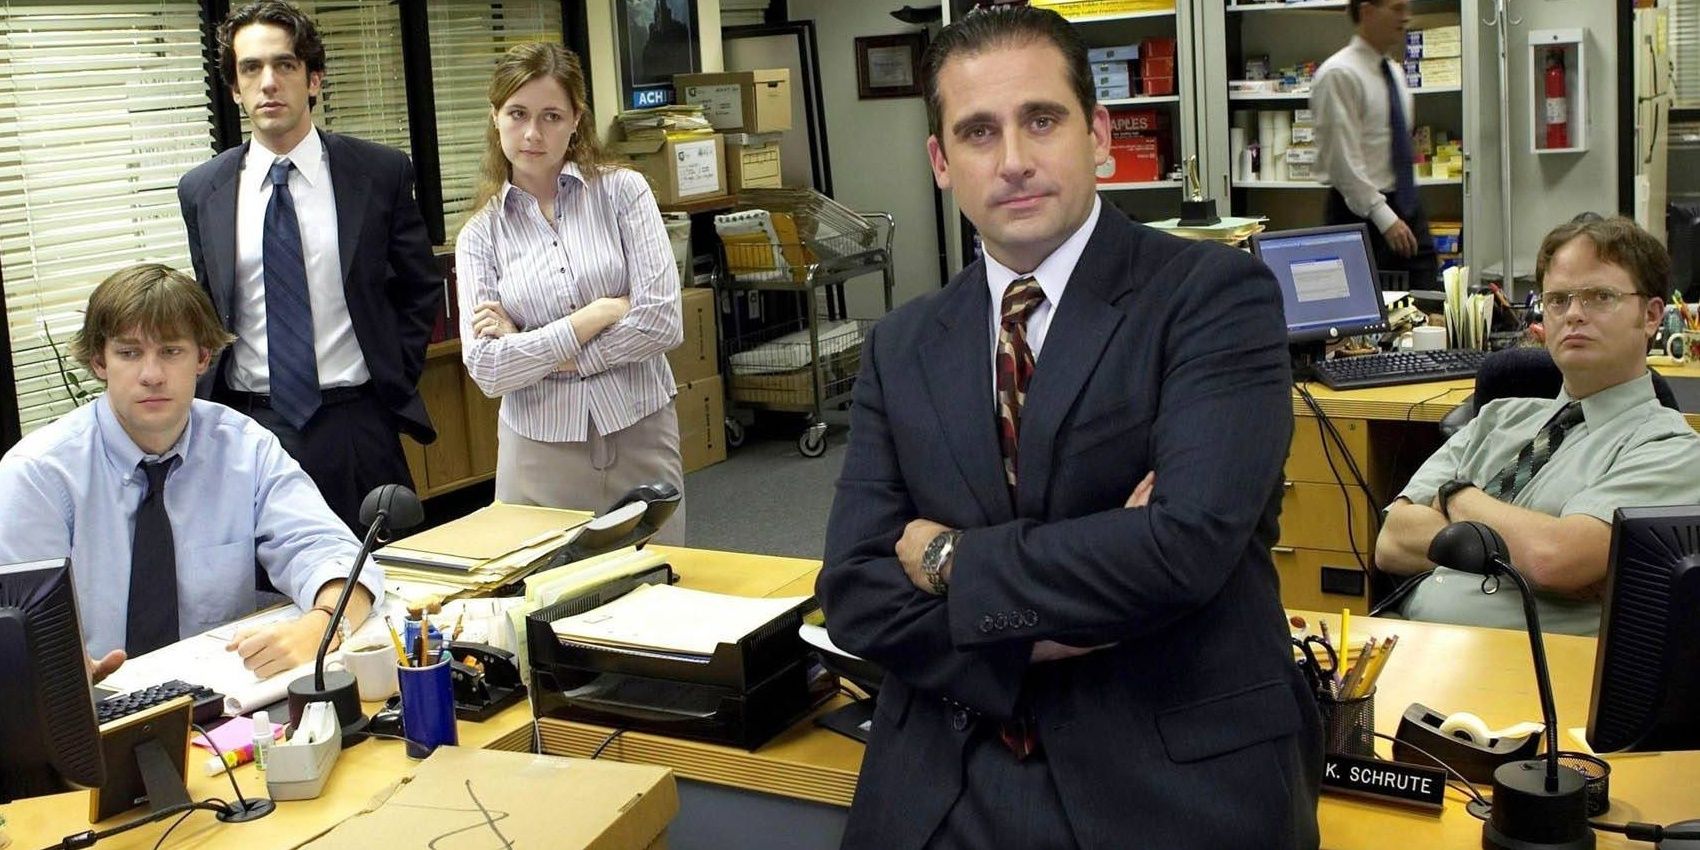 michael scott standing in front of the office